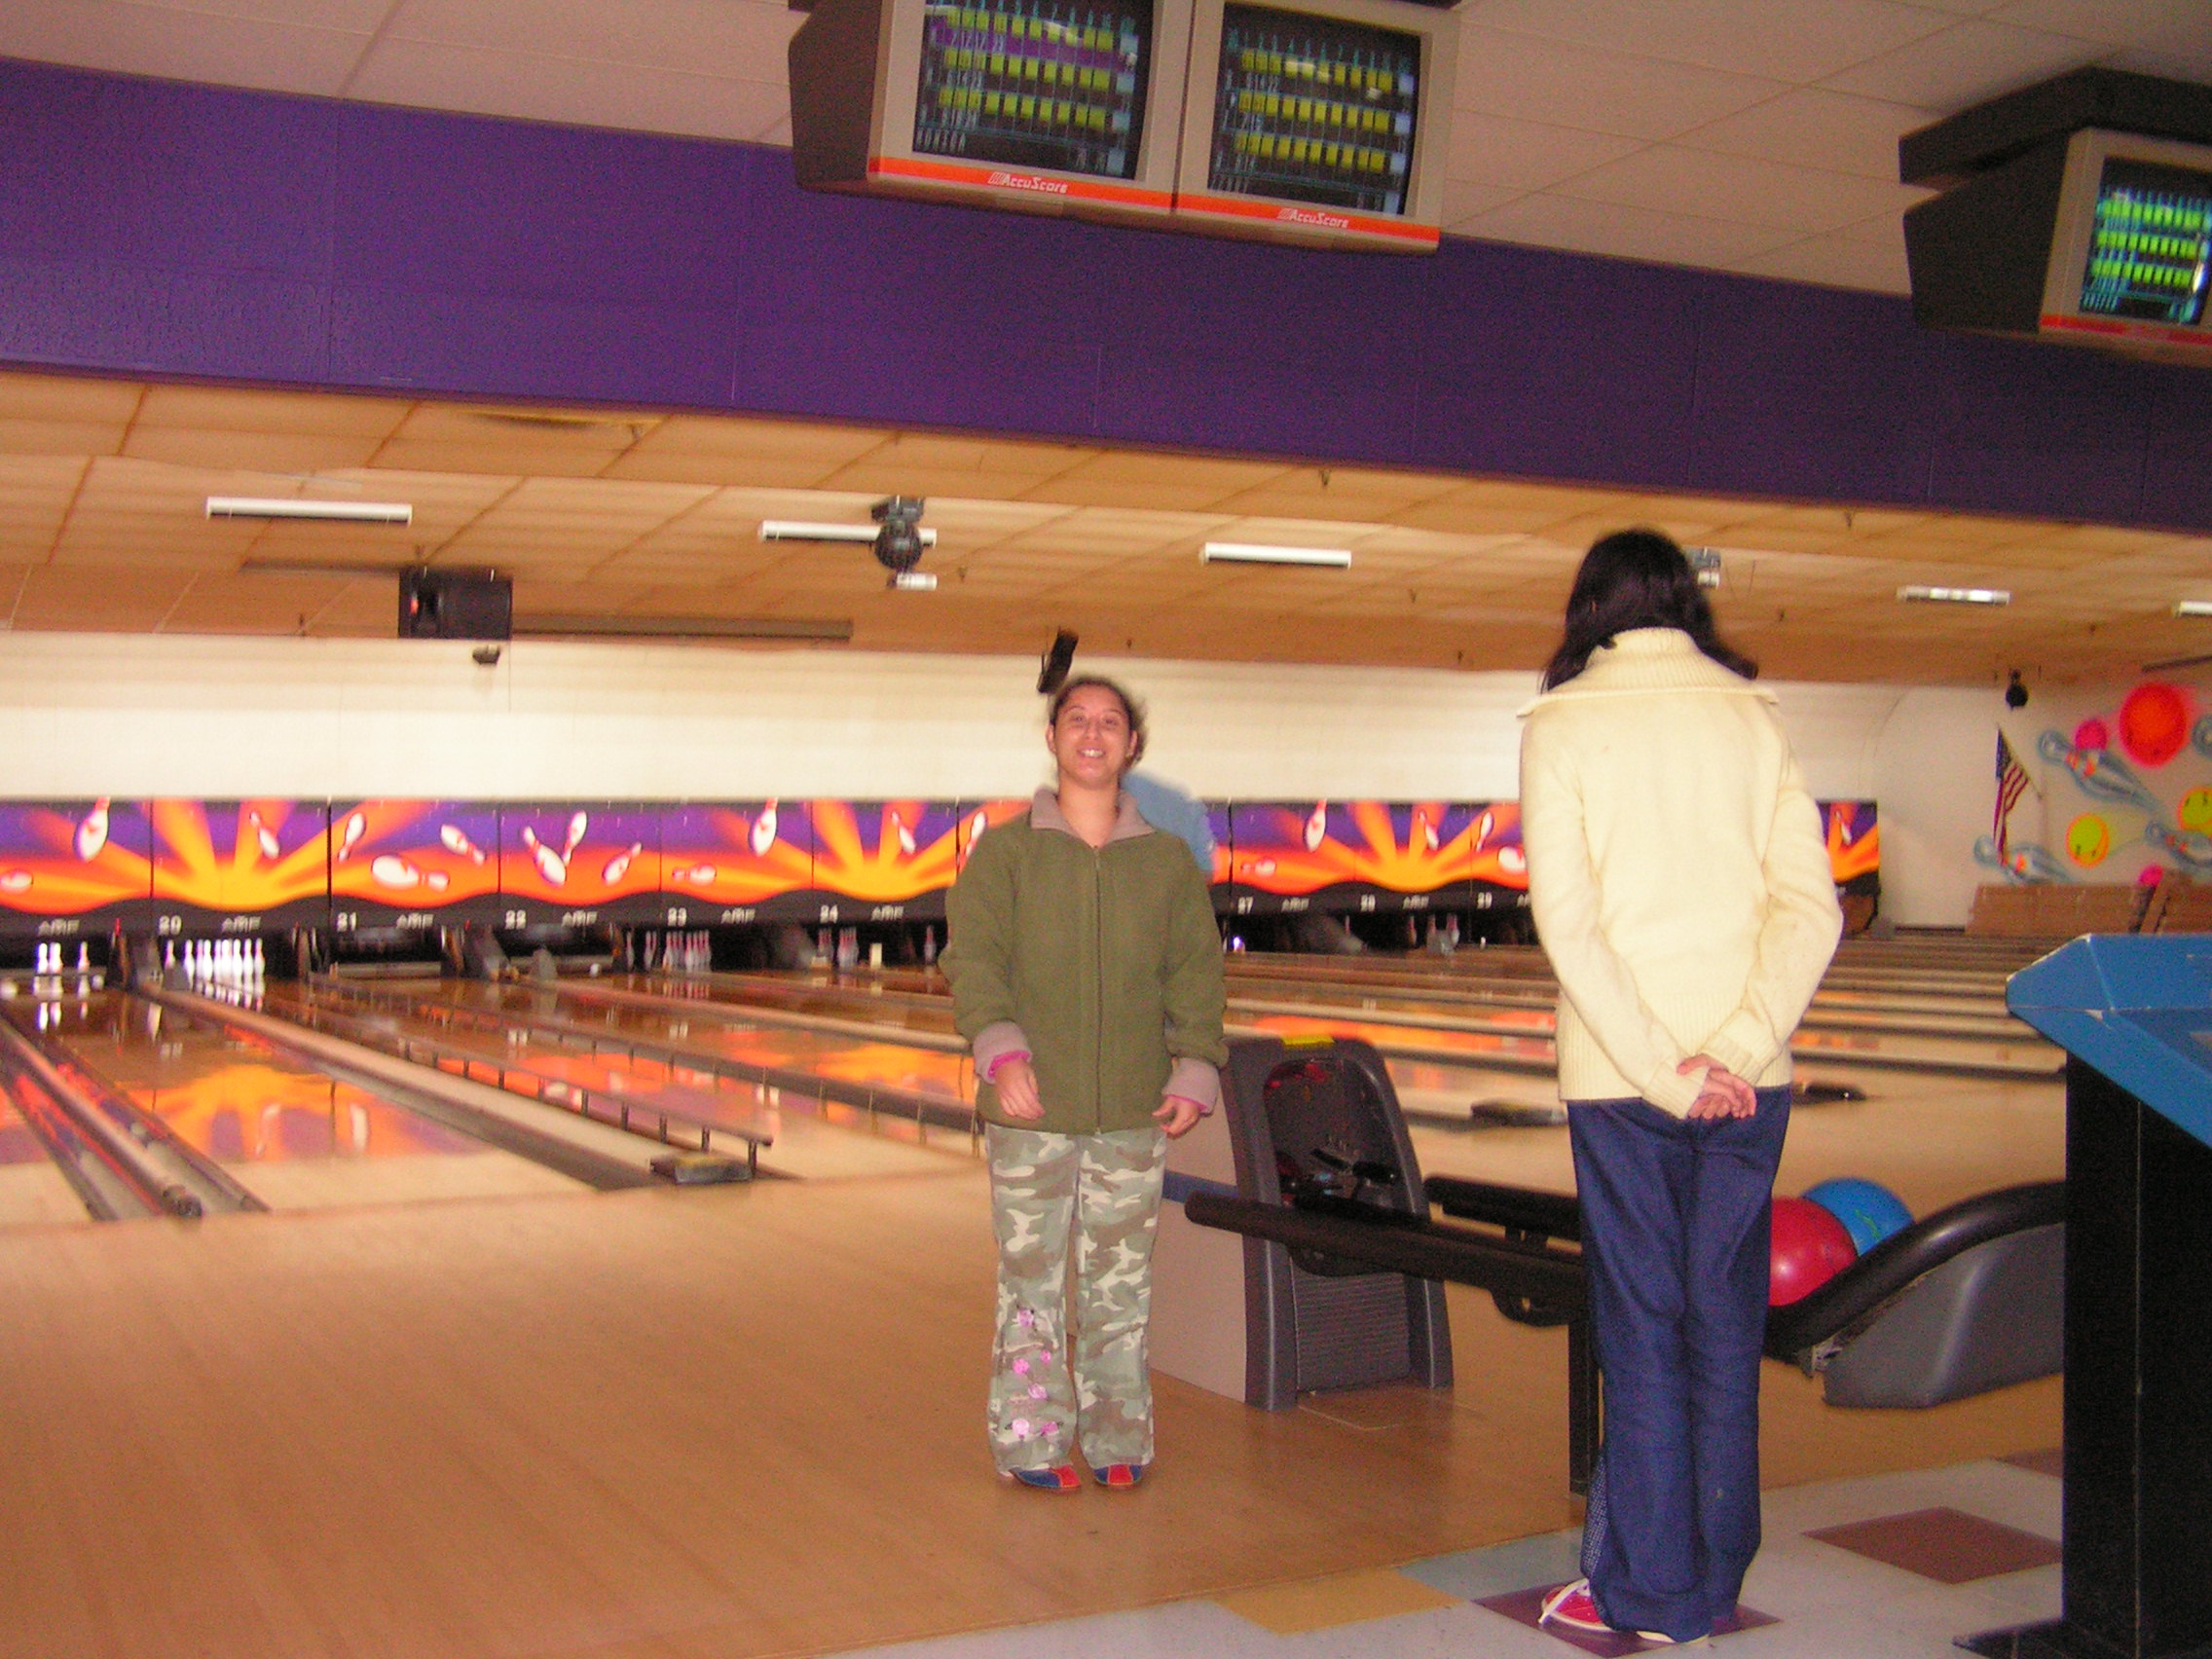 ./2006/Special Olympics Bowling/SOBowlingPractice6.jpg